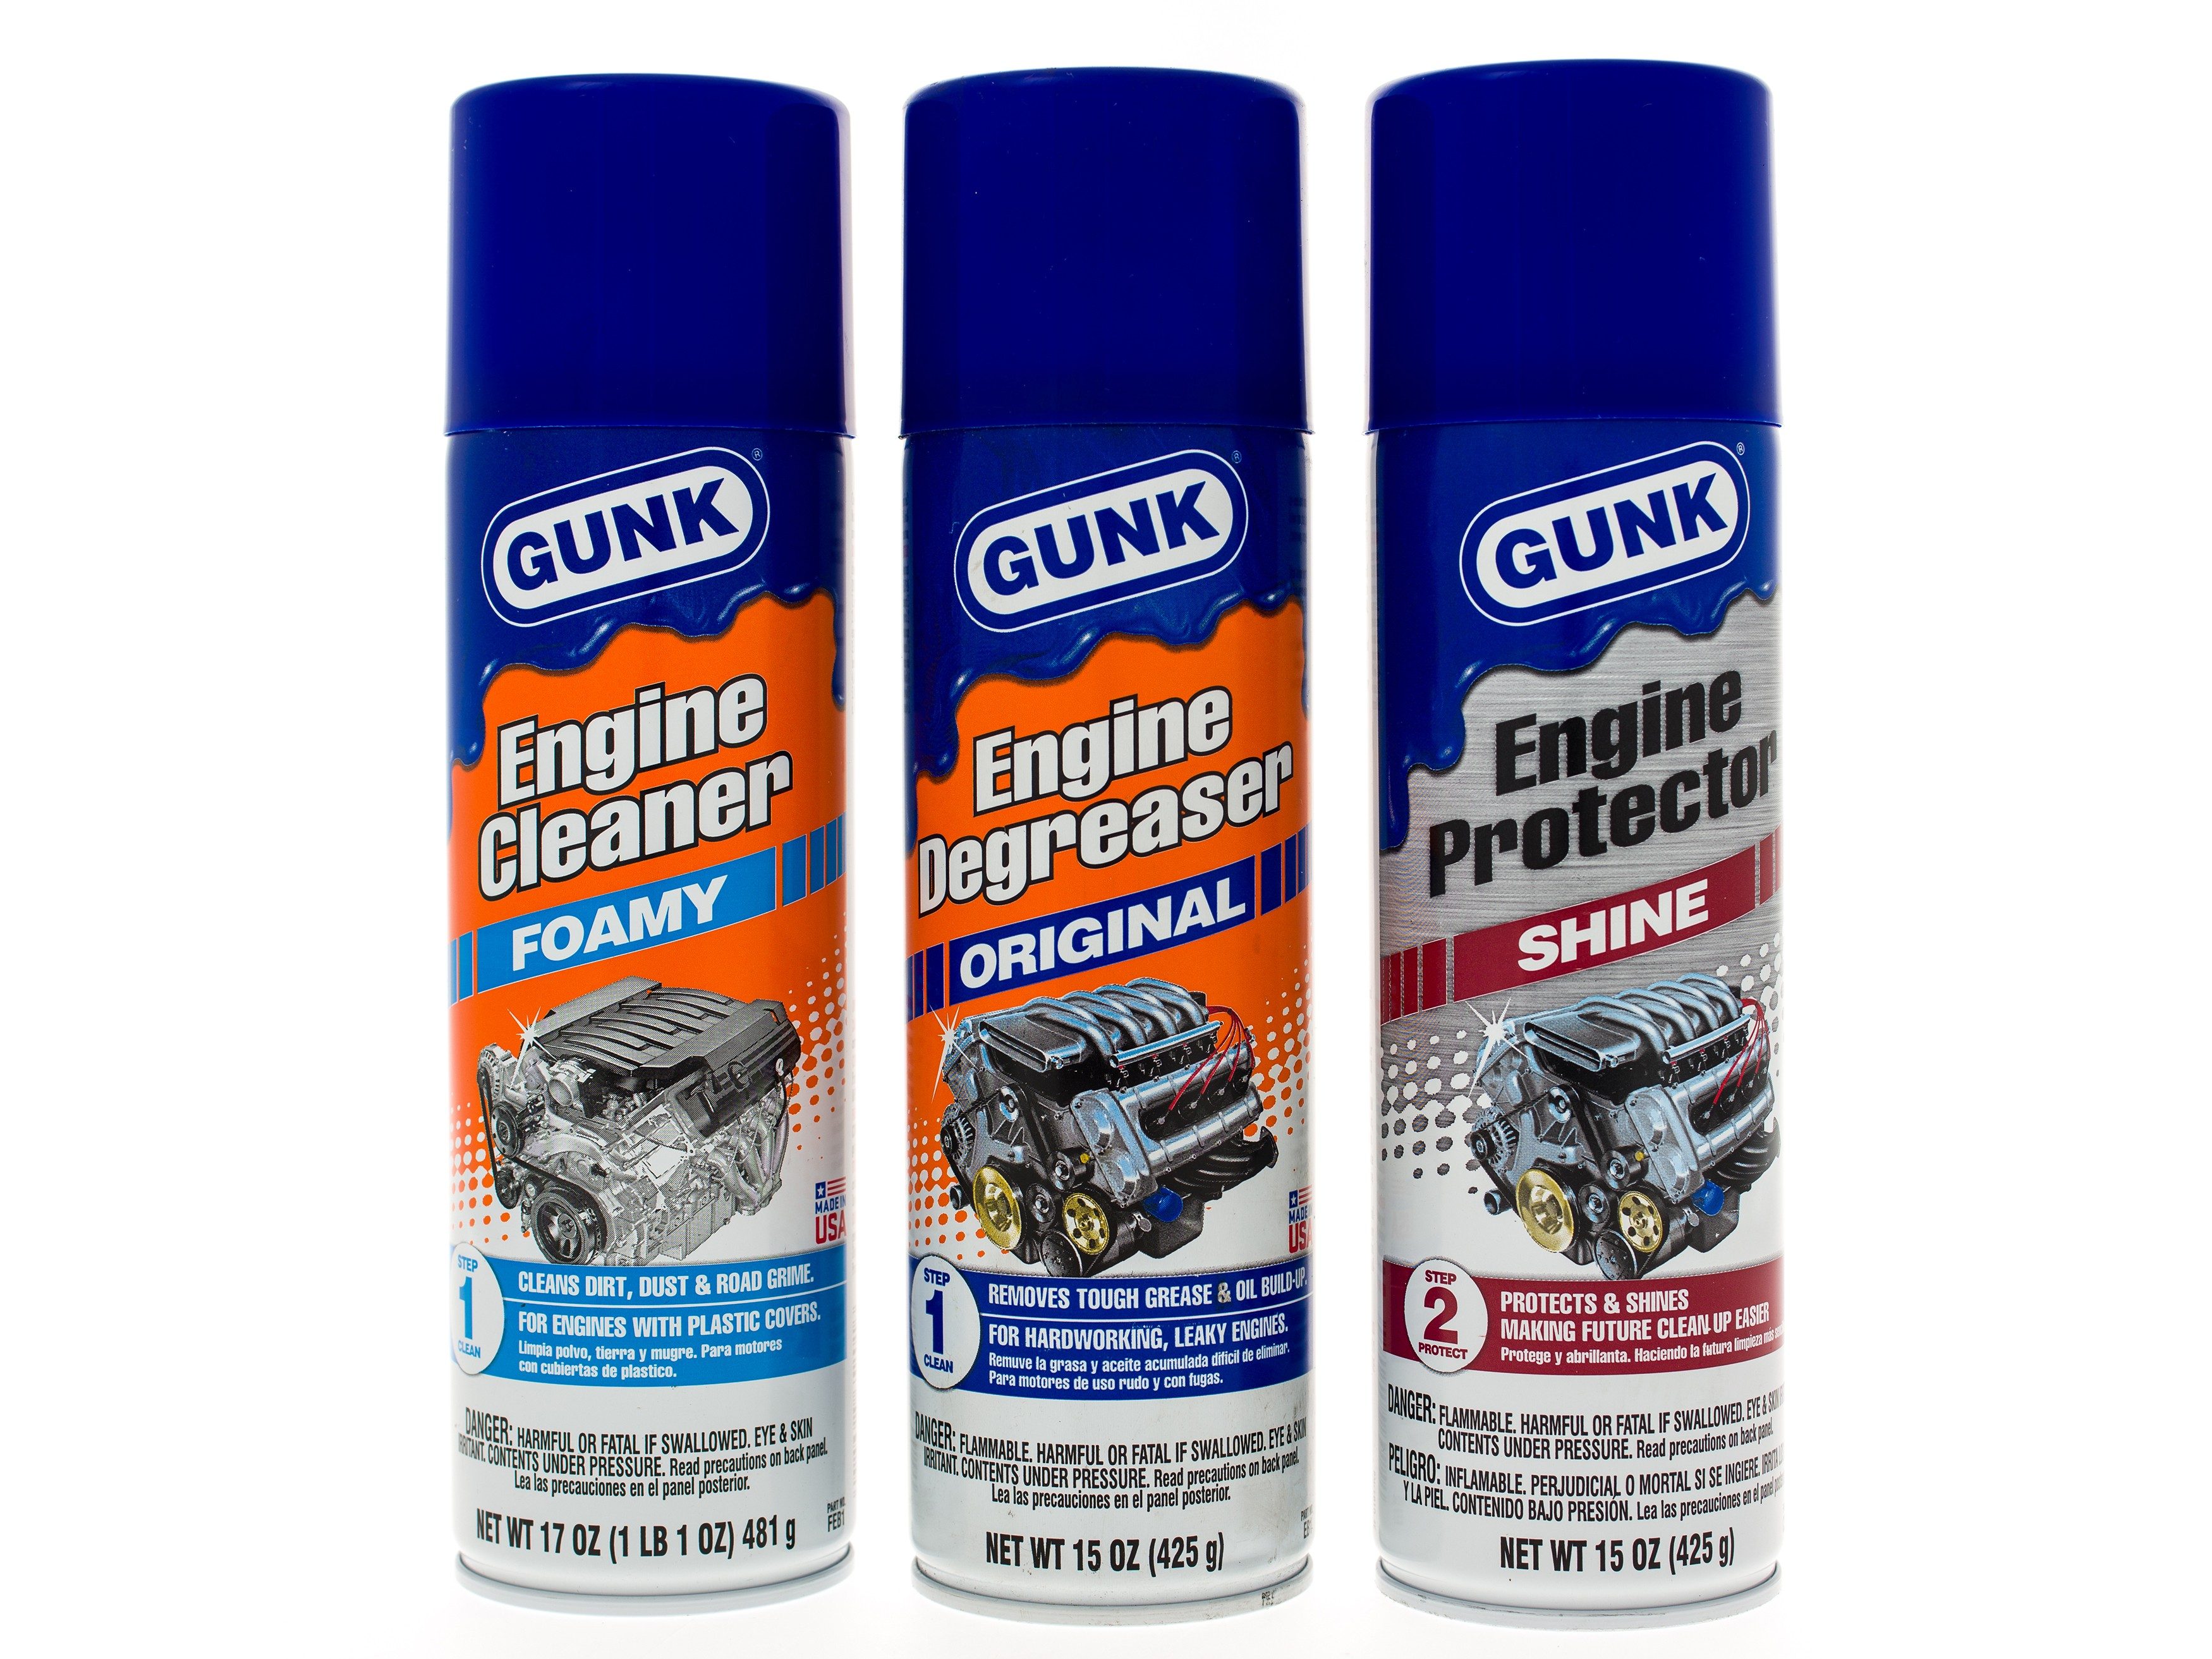 How to Degrease an Engine with GUNK Foamy Cleaner